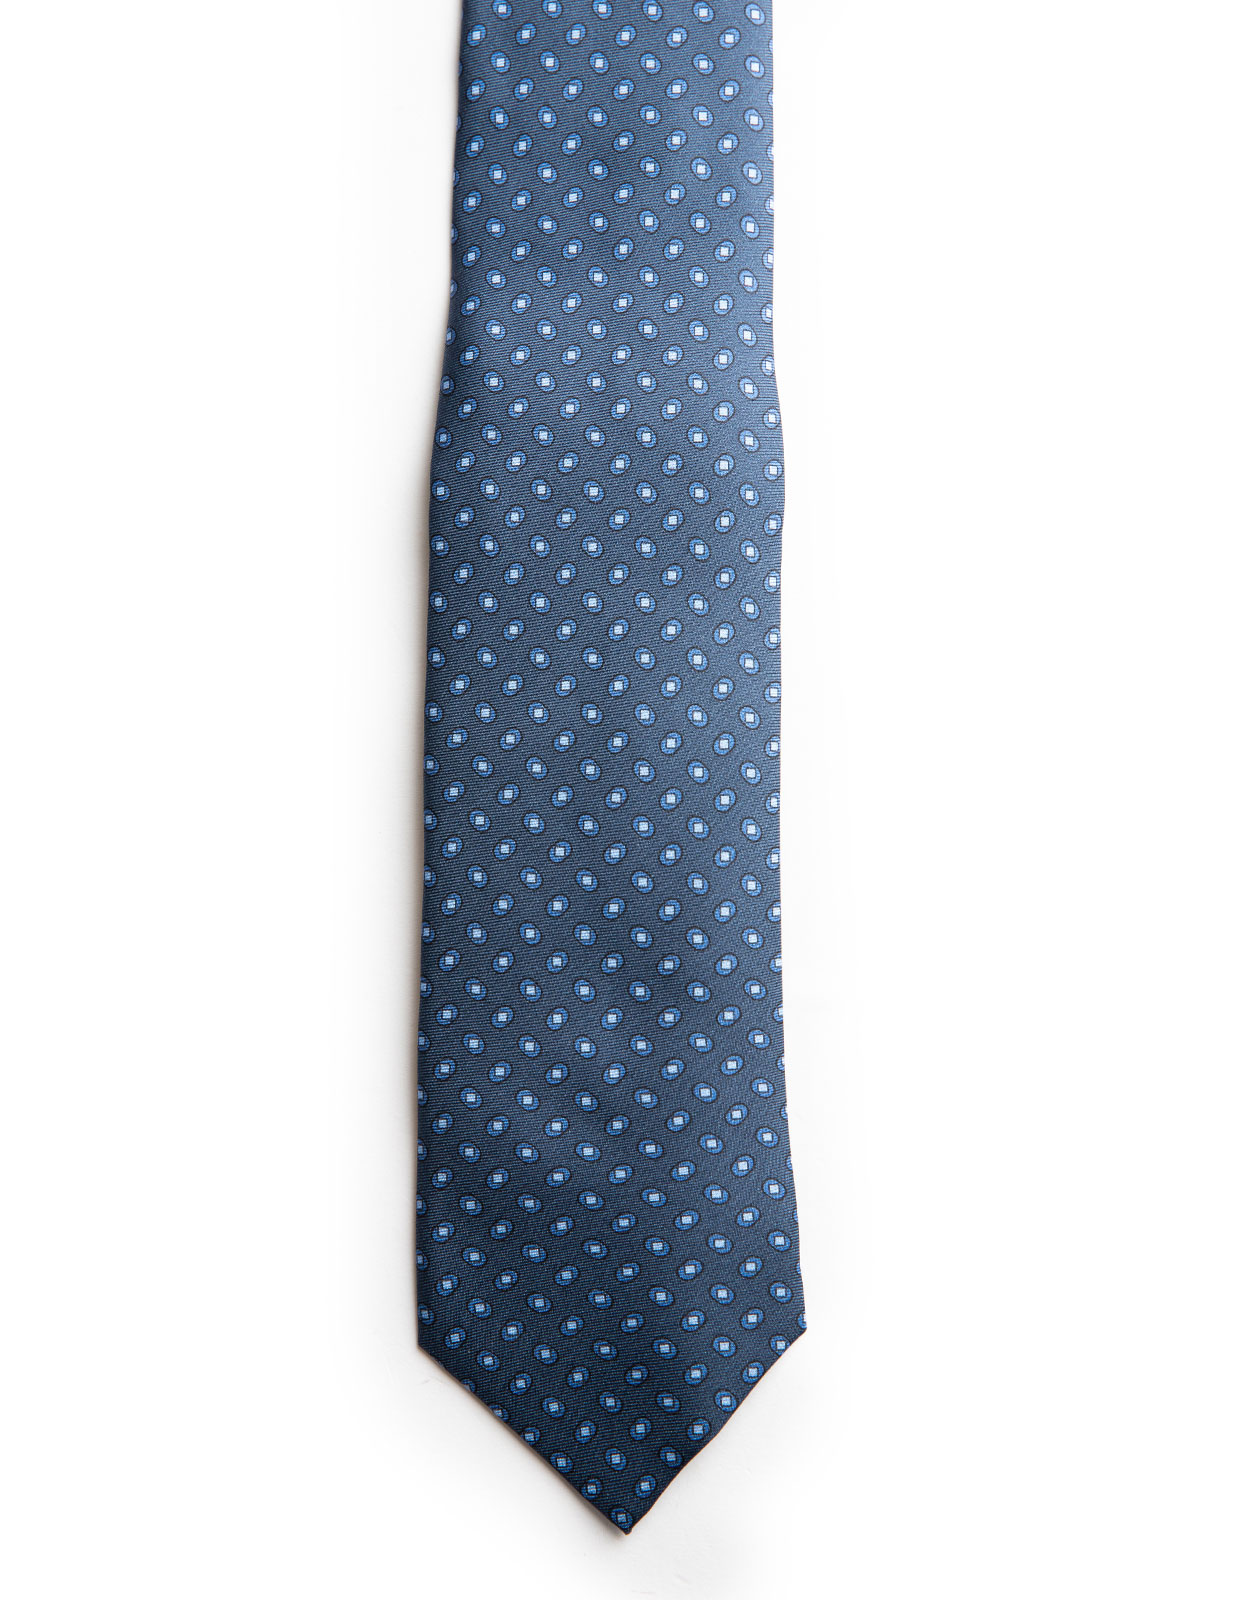 Printed Silk Tie Blue on Blue Dots